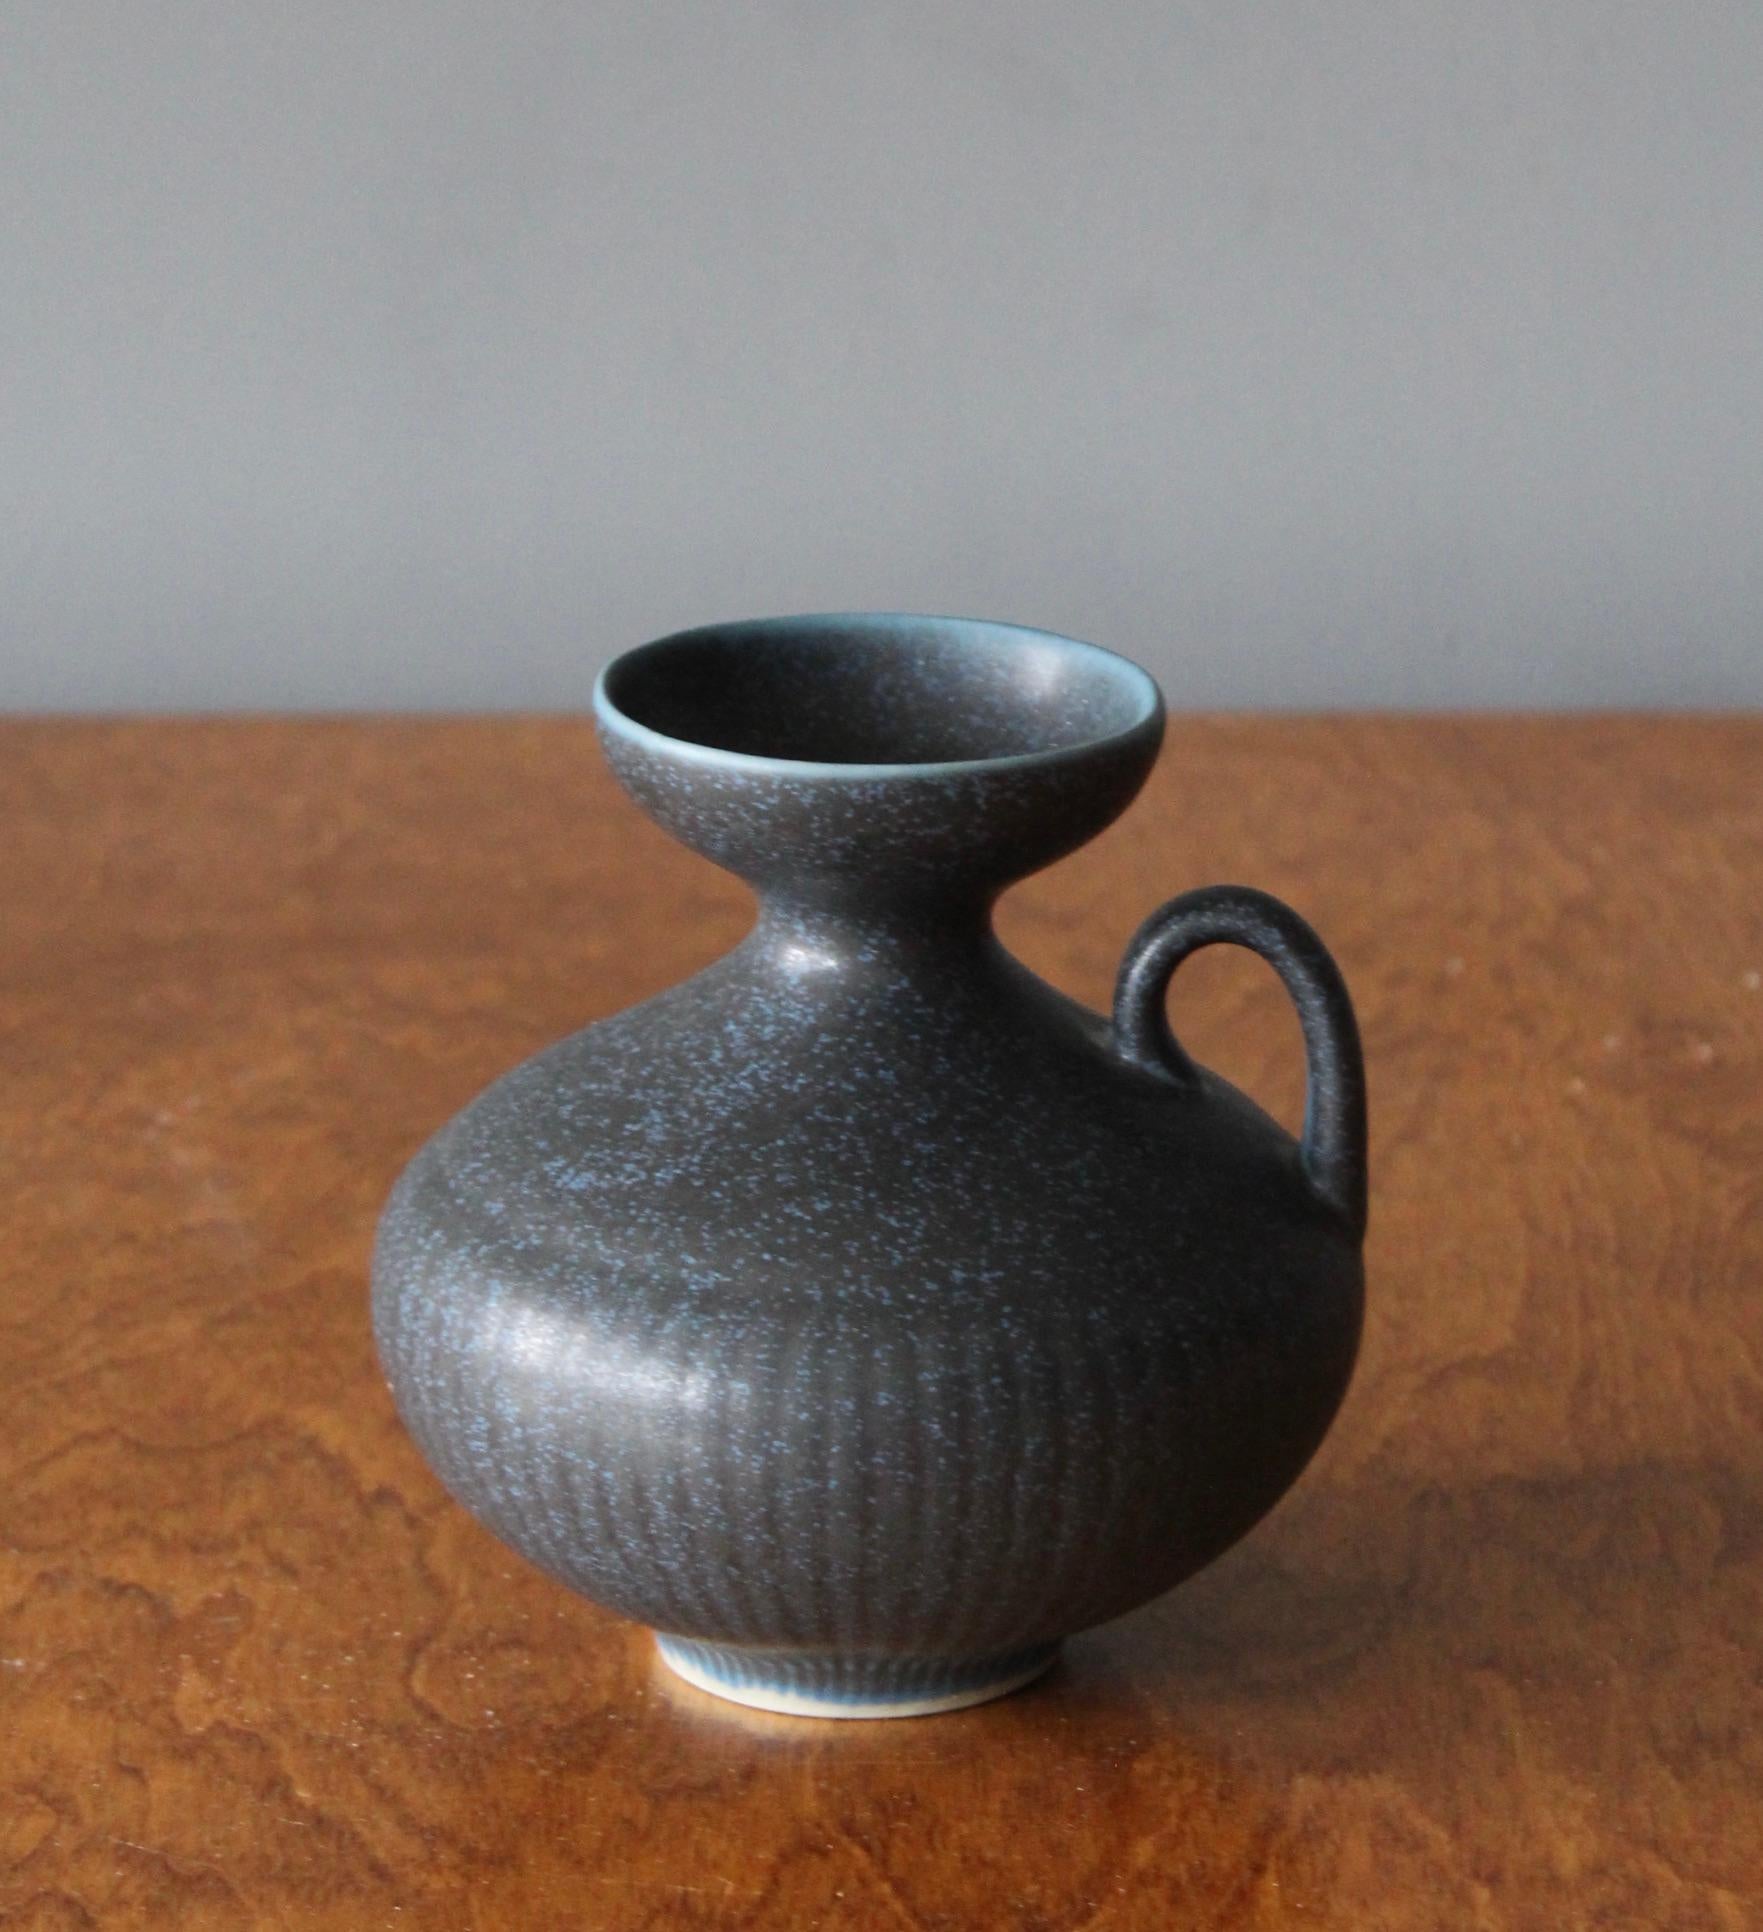 A vase or vessel produced by Rörstrands, Sweden, 1950s. Designed by Gunnar Nylund, (Swedish, 1914-1997). Signed.

Nylund served as artistic director at Rörstrands, where he worked 1931-1955. Prior to his work at Rörstrand he was a well-established